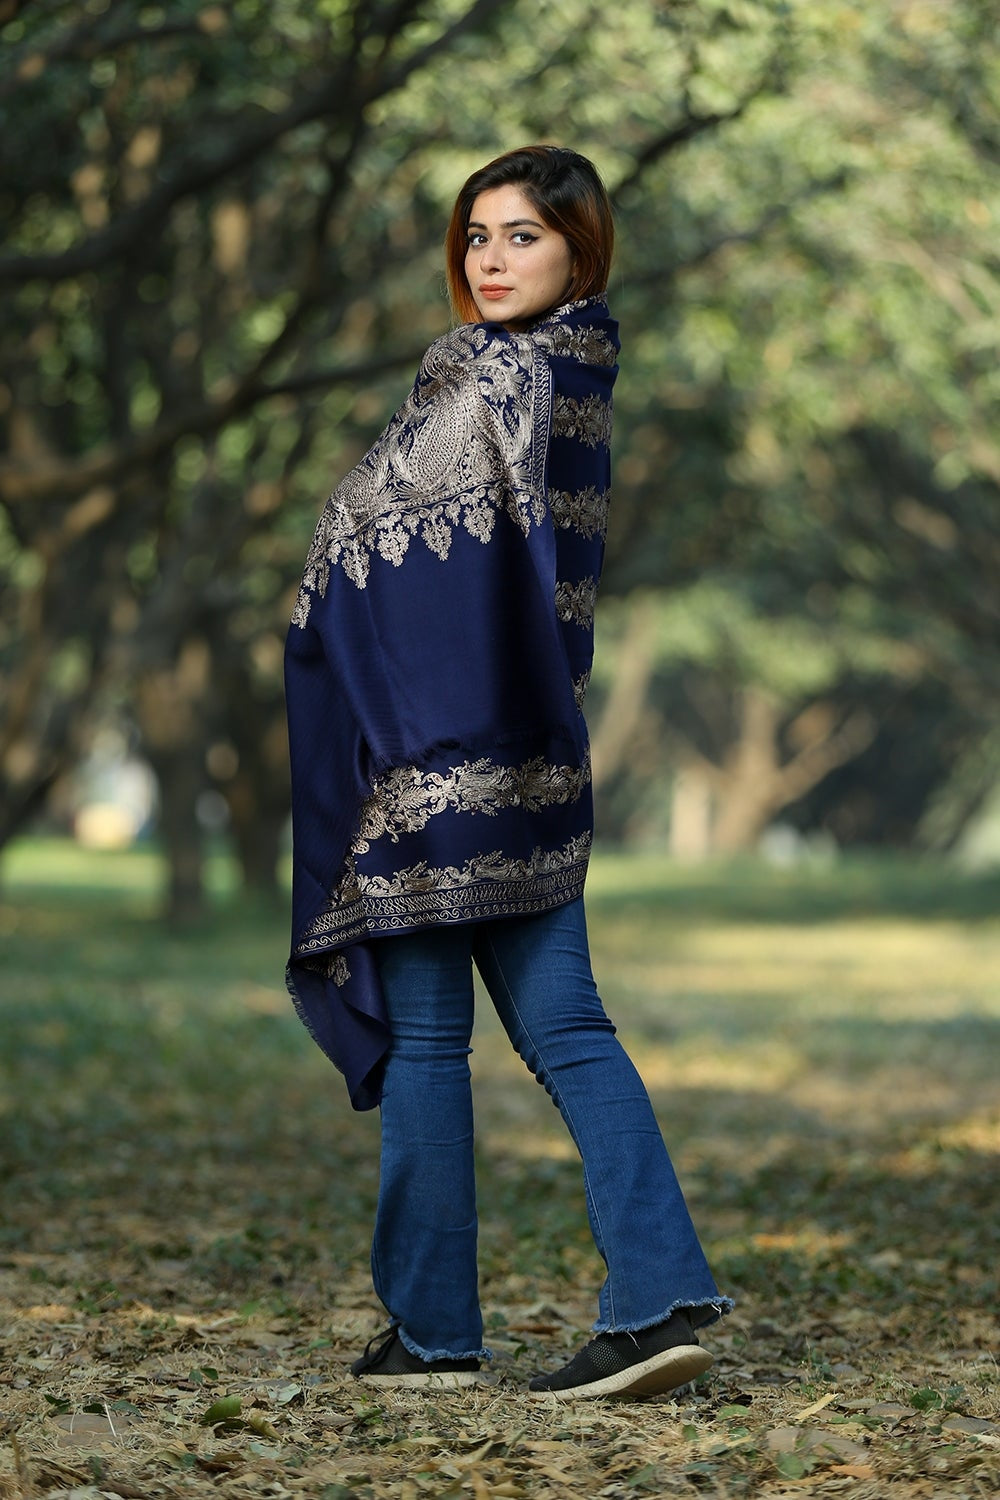 NAVY BLUE COLOUR SHAWL DEFINES FEMINISM AND ADDS GLAMOUR